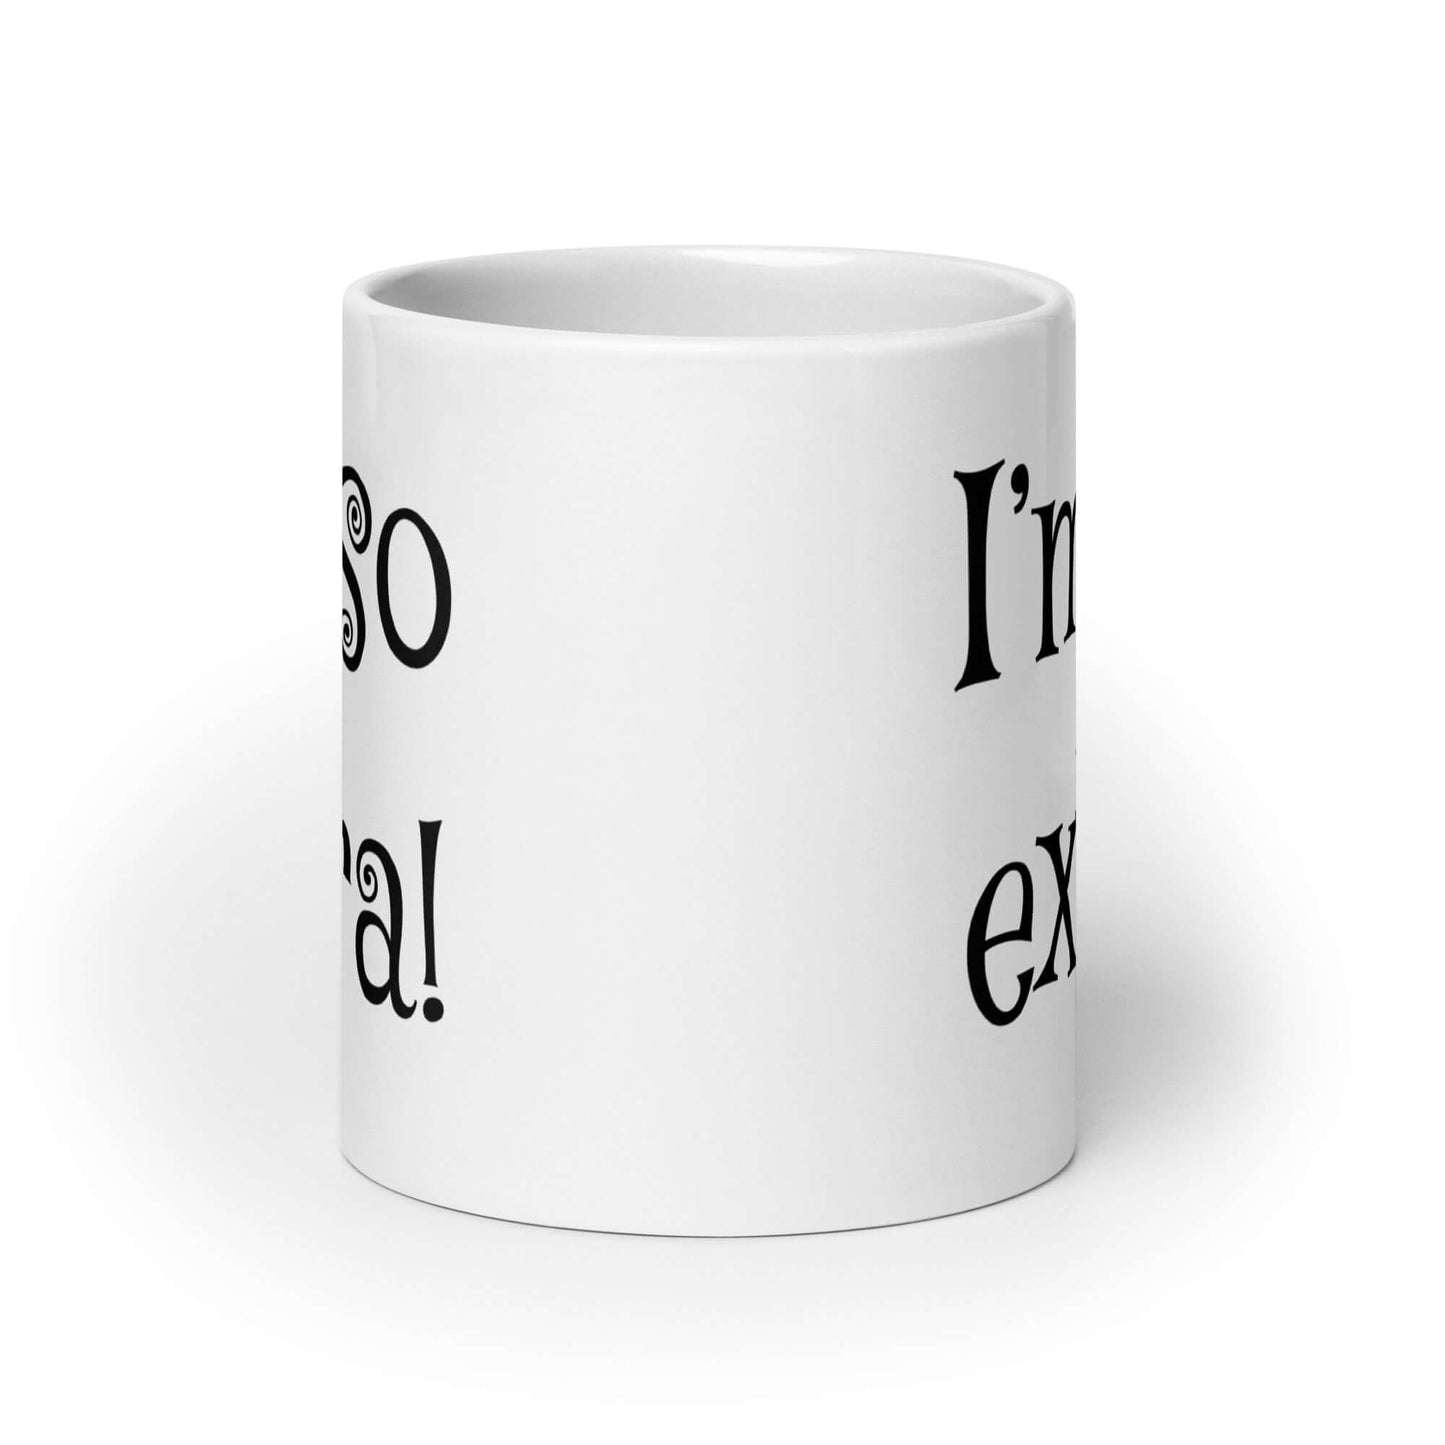 White ceramic mug with the words I'm so extra printed on both sides.